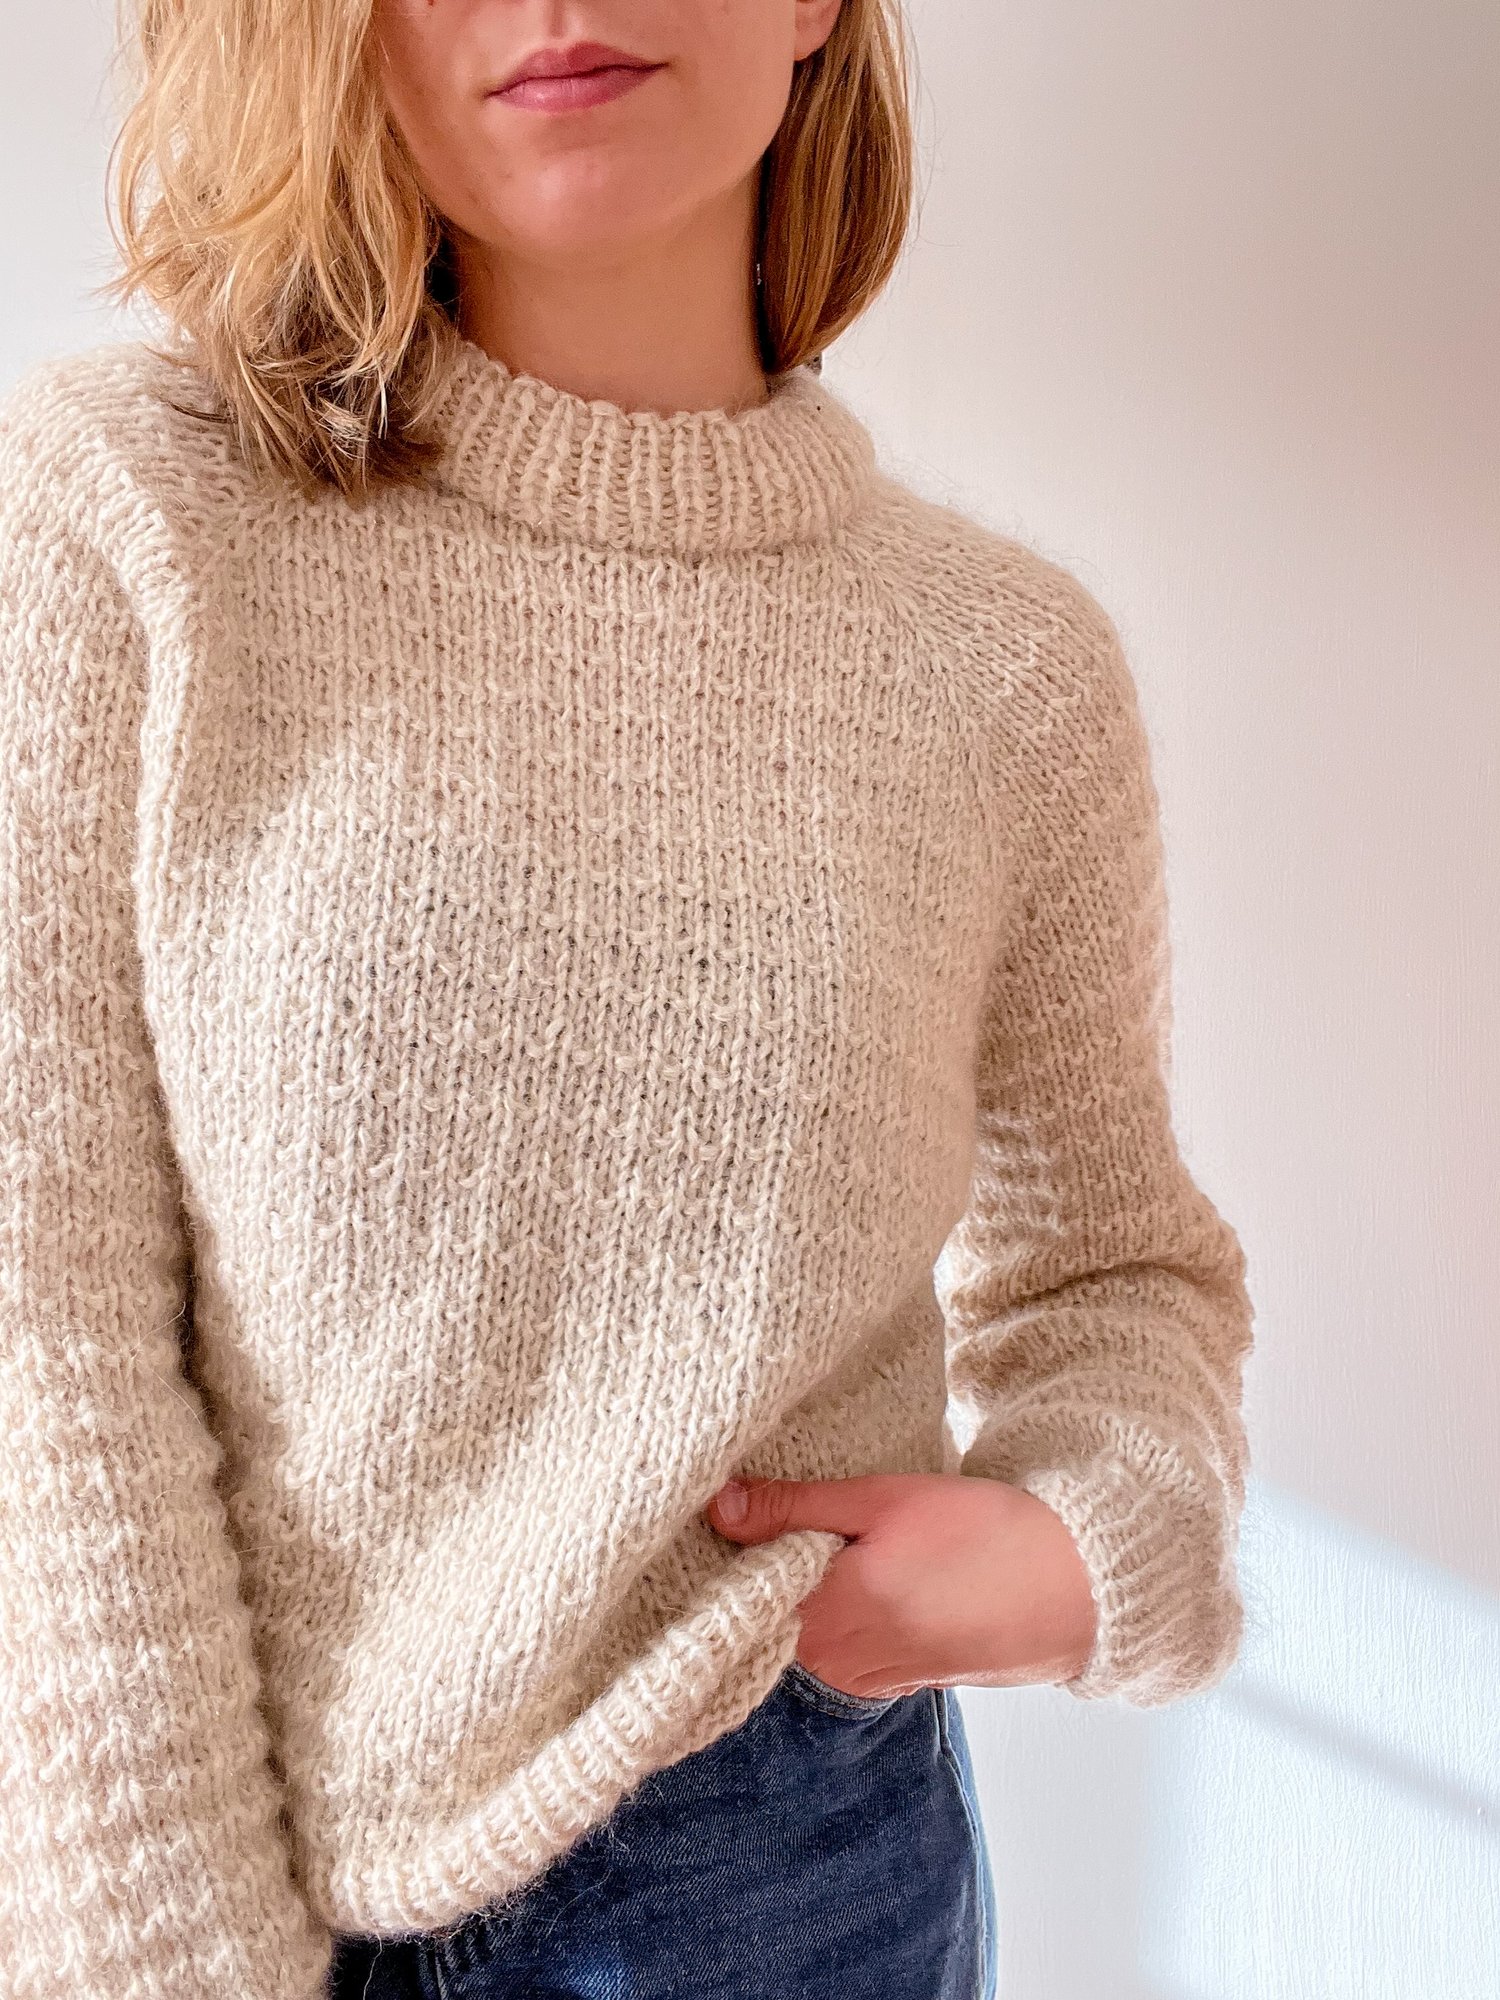 Aosta Sweater Girl (3.0) Knit Purl — The